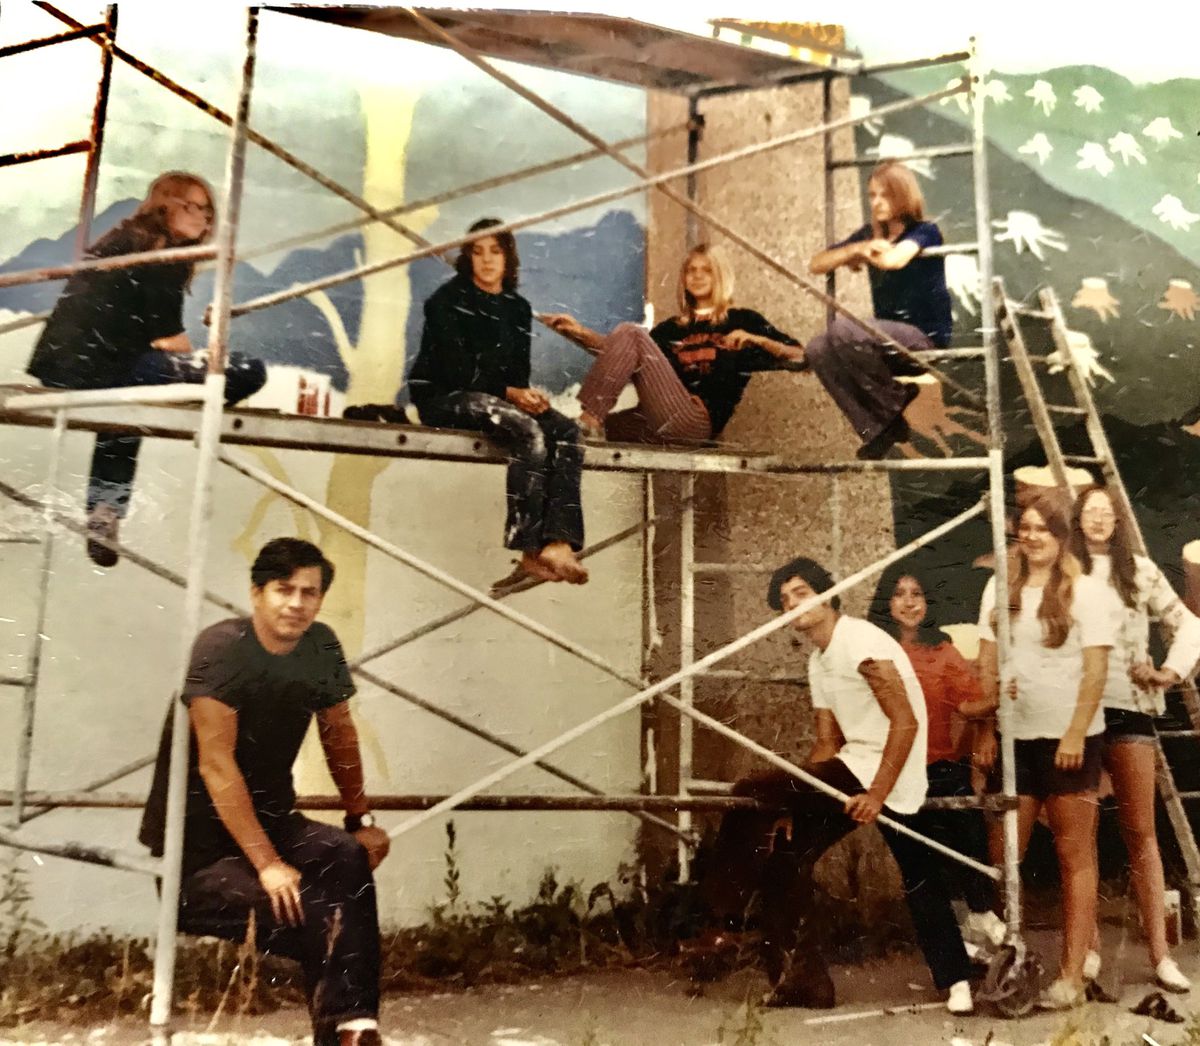 Artist Ricardo Alonzo and some of his students working on the Hubbard Street murals in the 1970s.